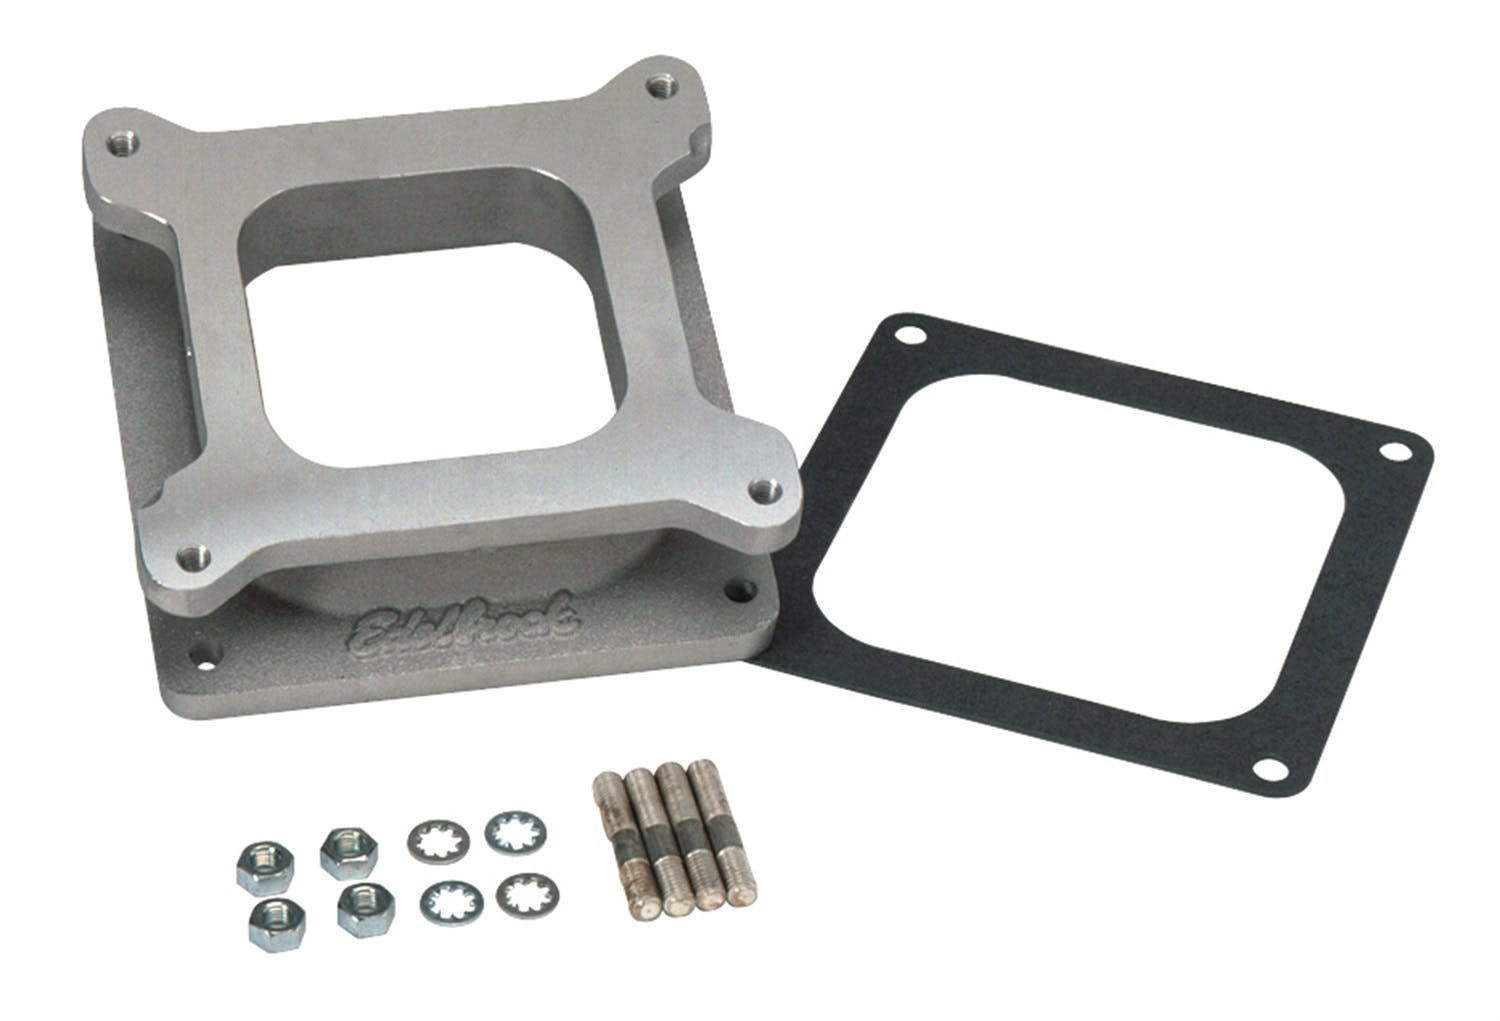 Edelbrock 8716 Carb Adapter Mounts 4150 Standard Flange Carb to 4500 Style Manifold